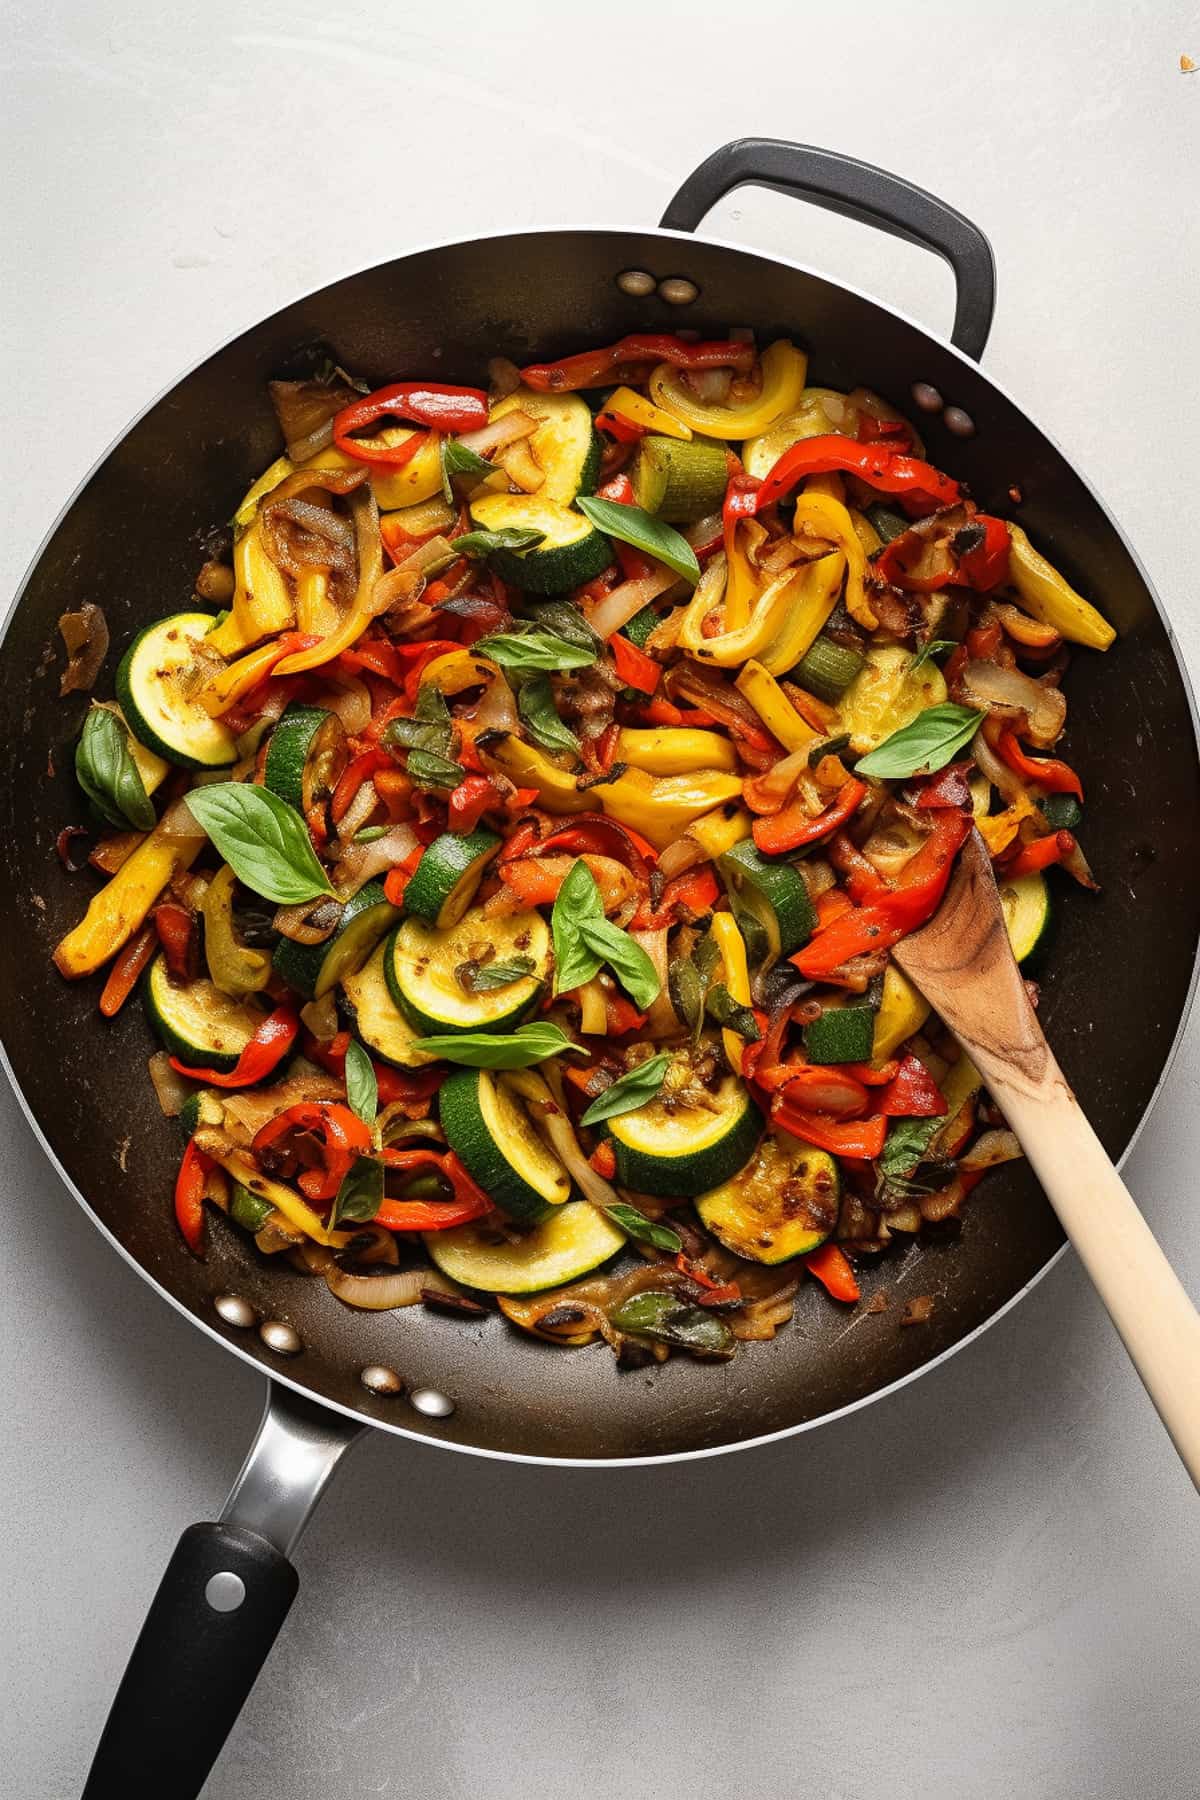 Vegetables sauteed for pasta bake.